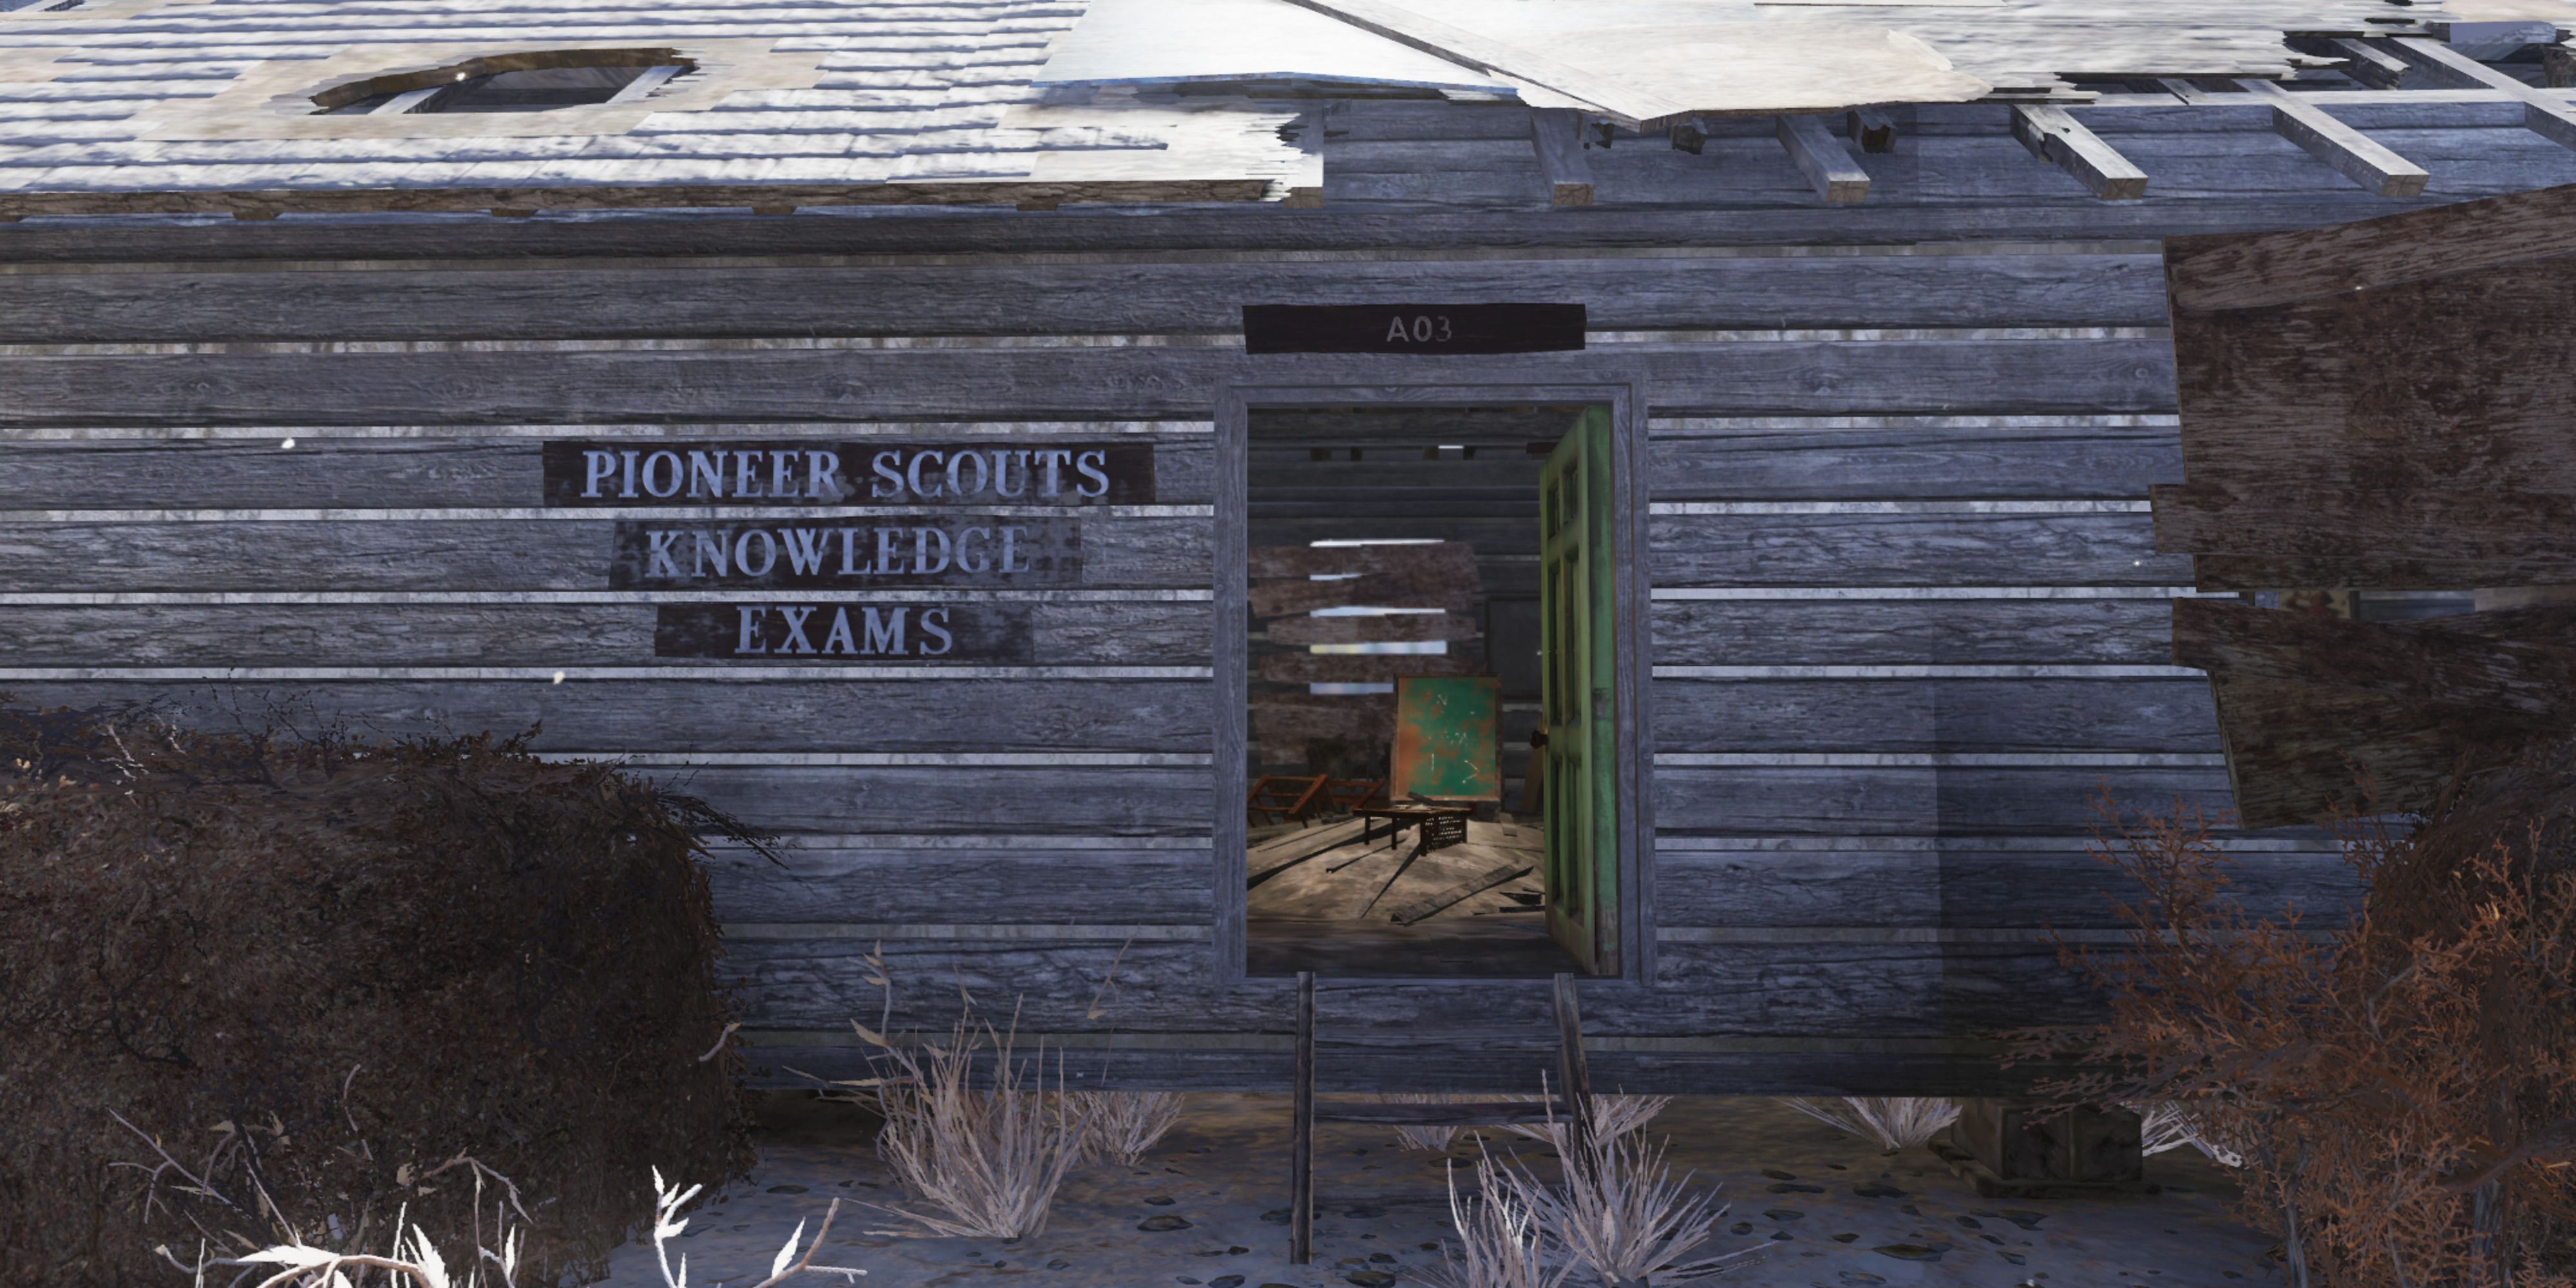 Entering the Pioneer Scouts knowledge exams building to take Possum exams in Fallout 76